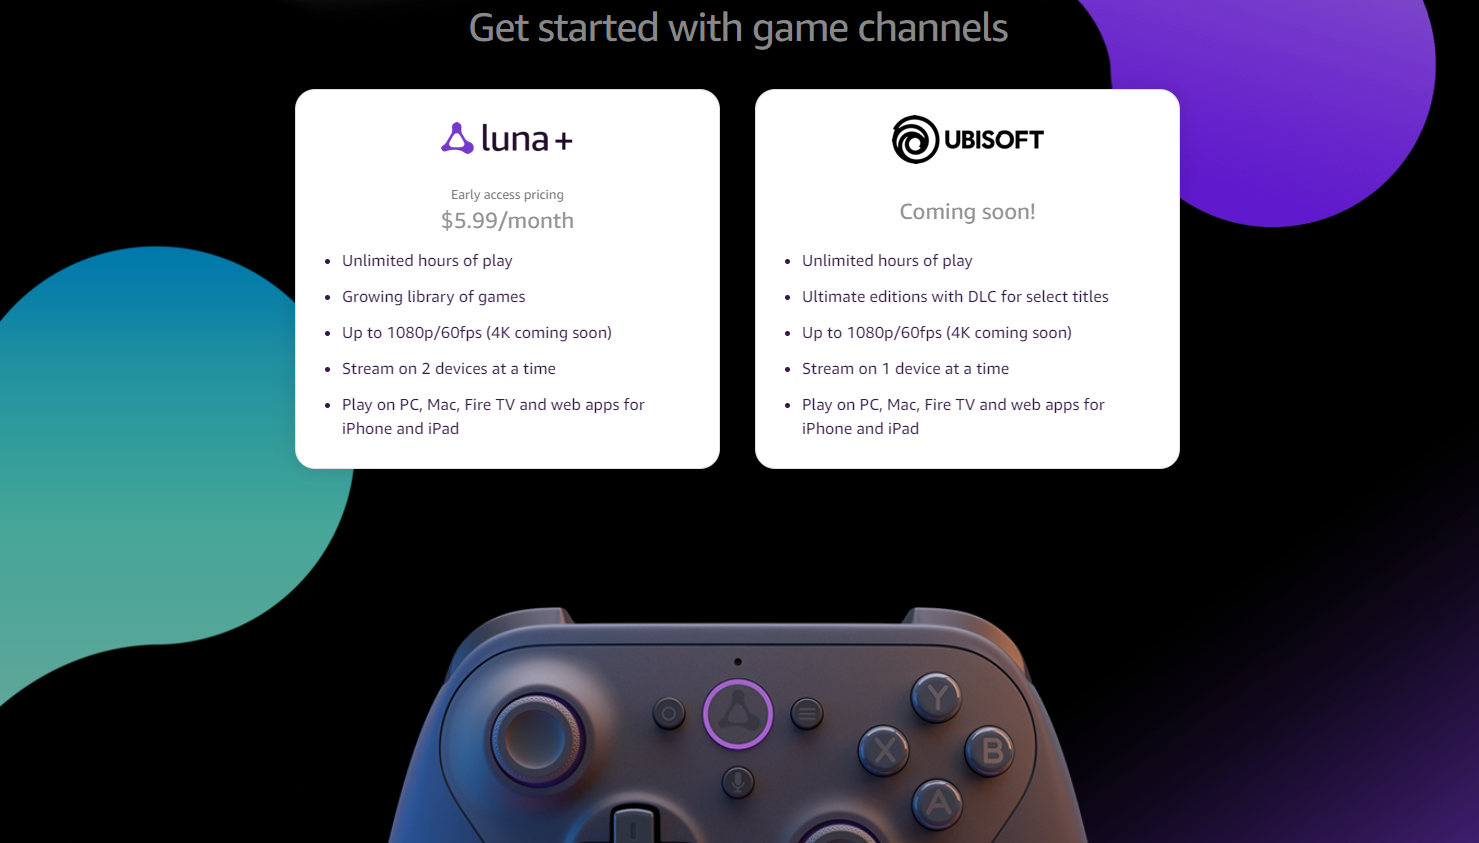 Luna game streaming services goes live (no invite required